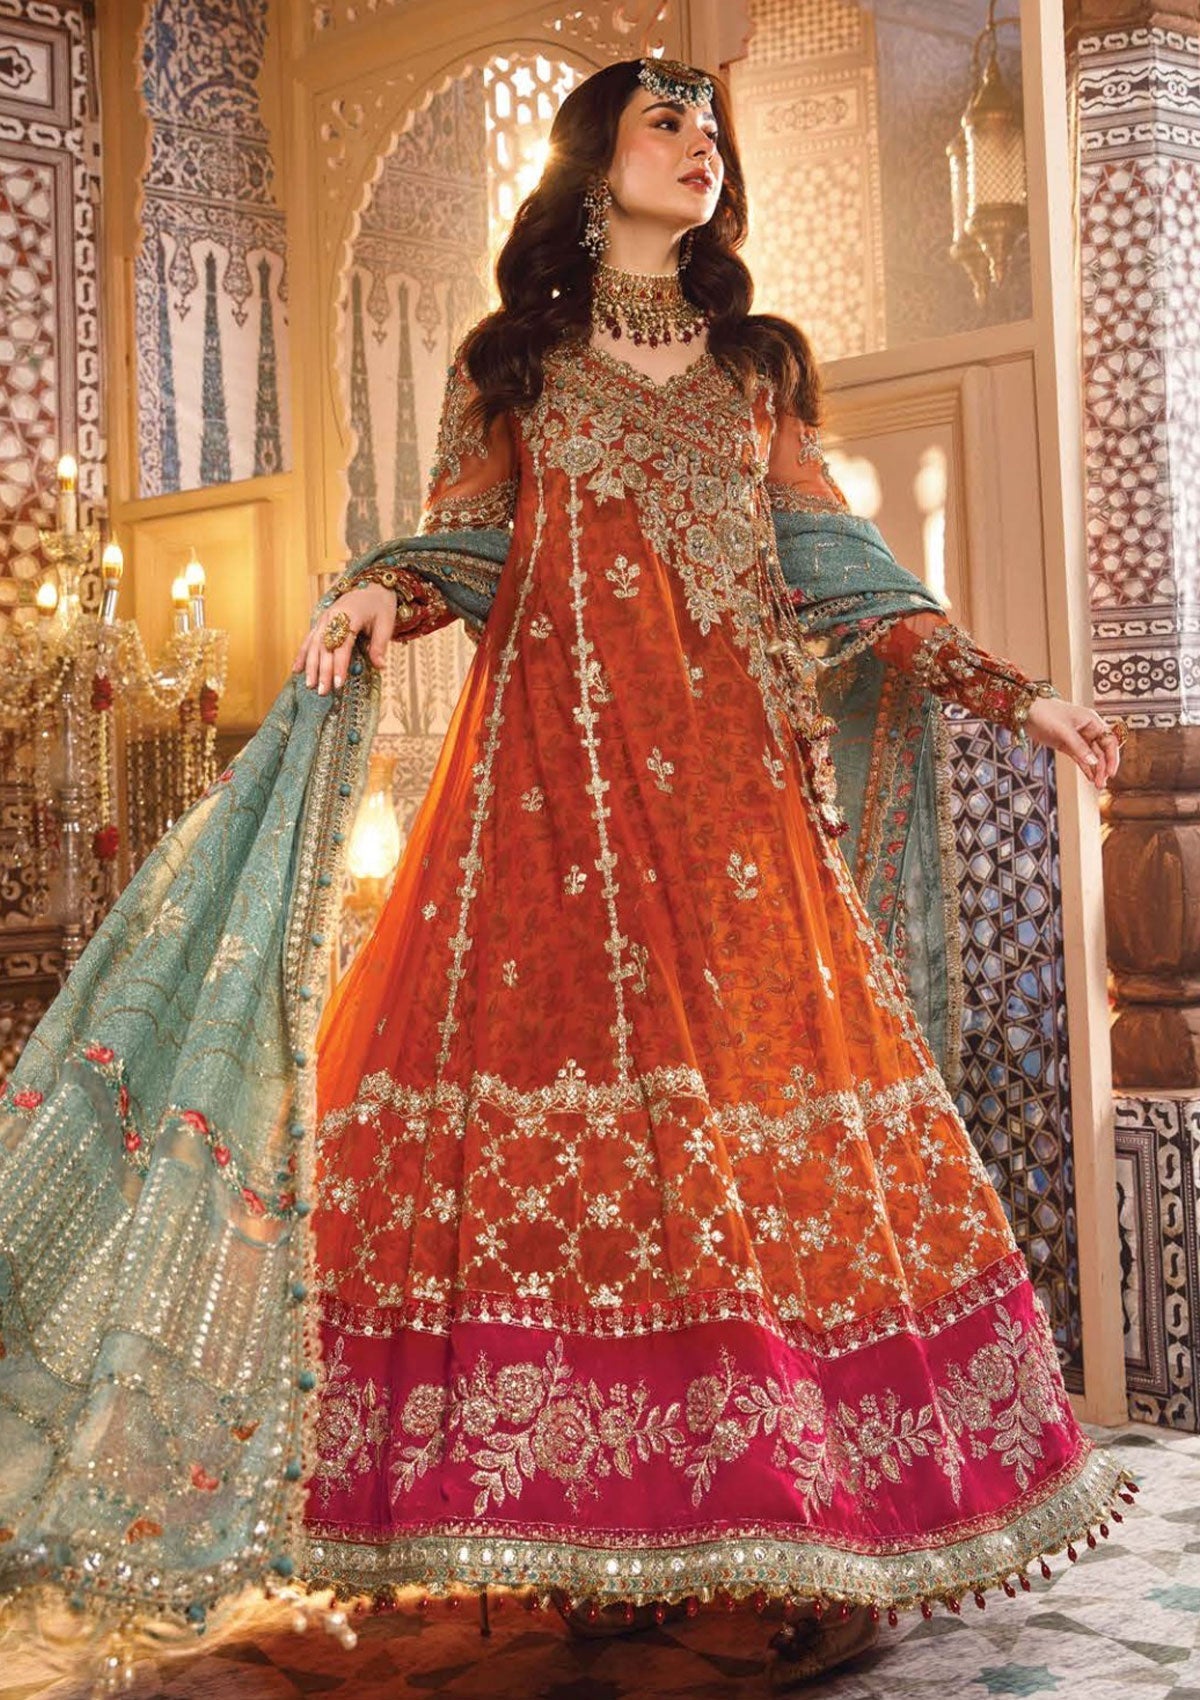 Formal Collection - Maria B - MBROIDERED - Wedding Edition - D#6 Saleem Fabrics Traditions